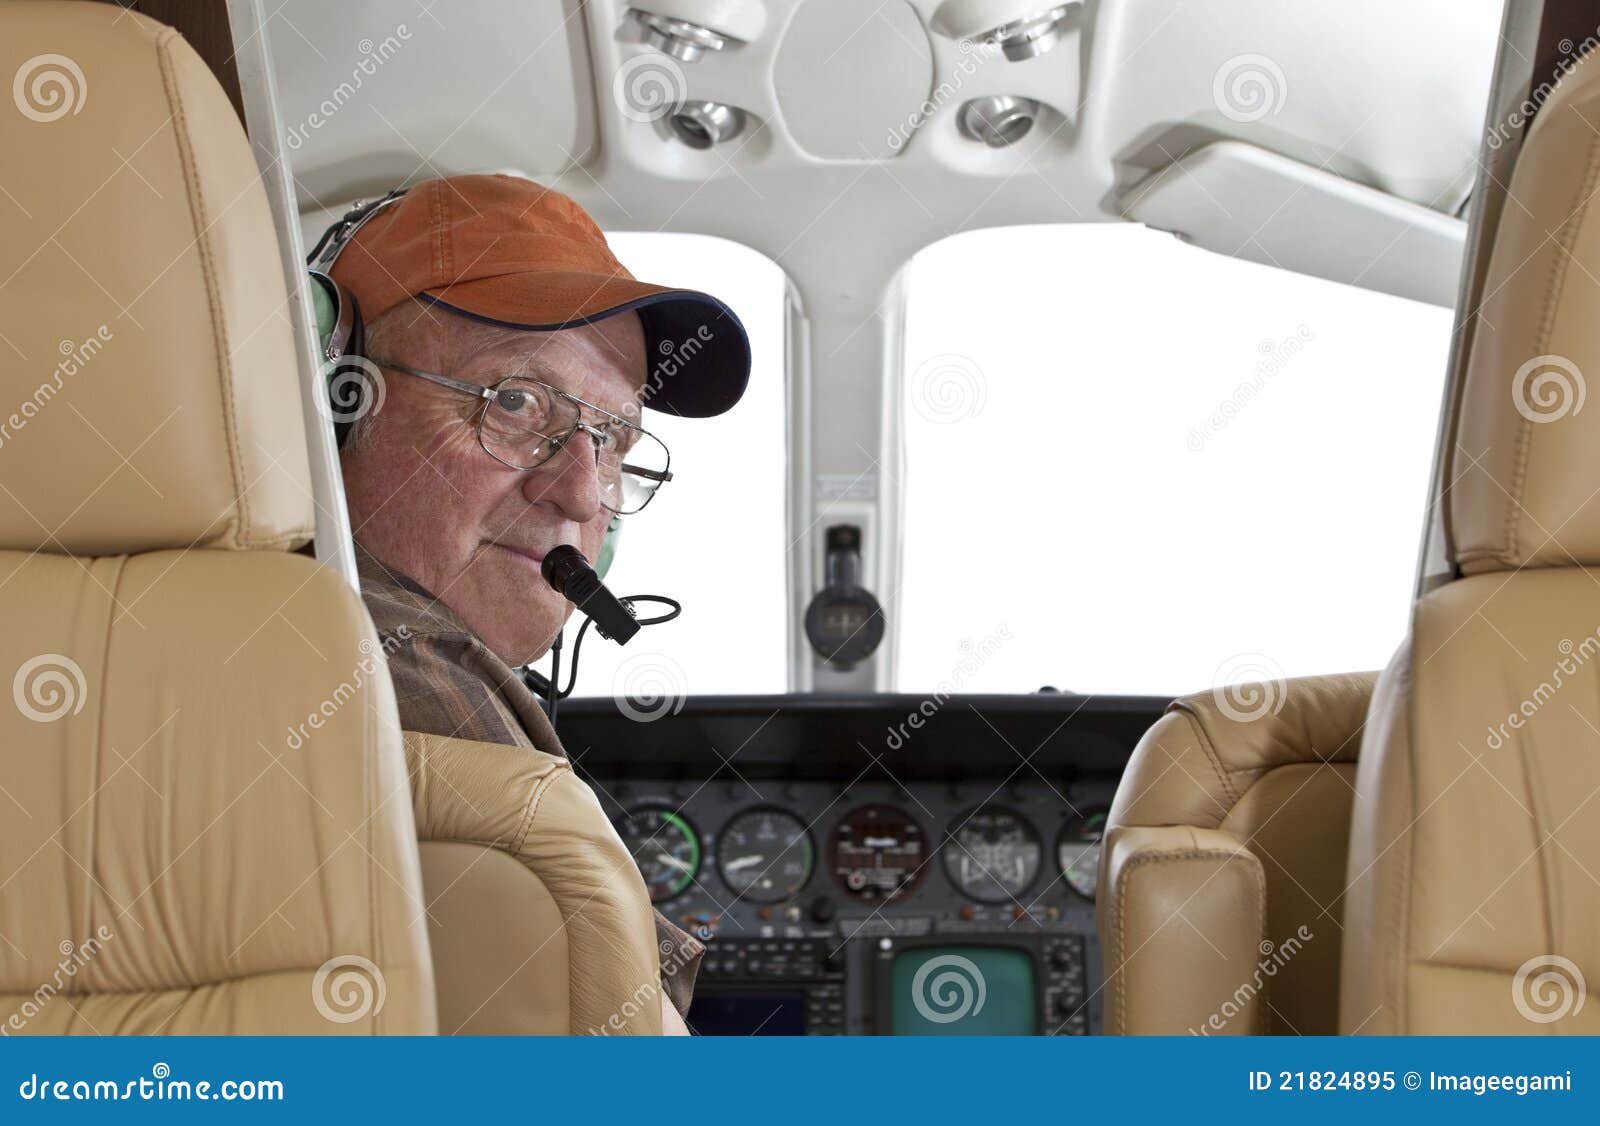 pilot looking at passenger compartment